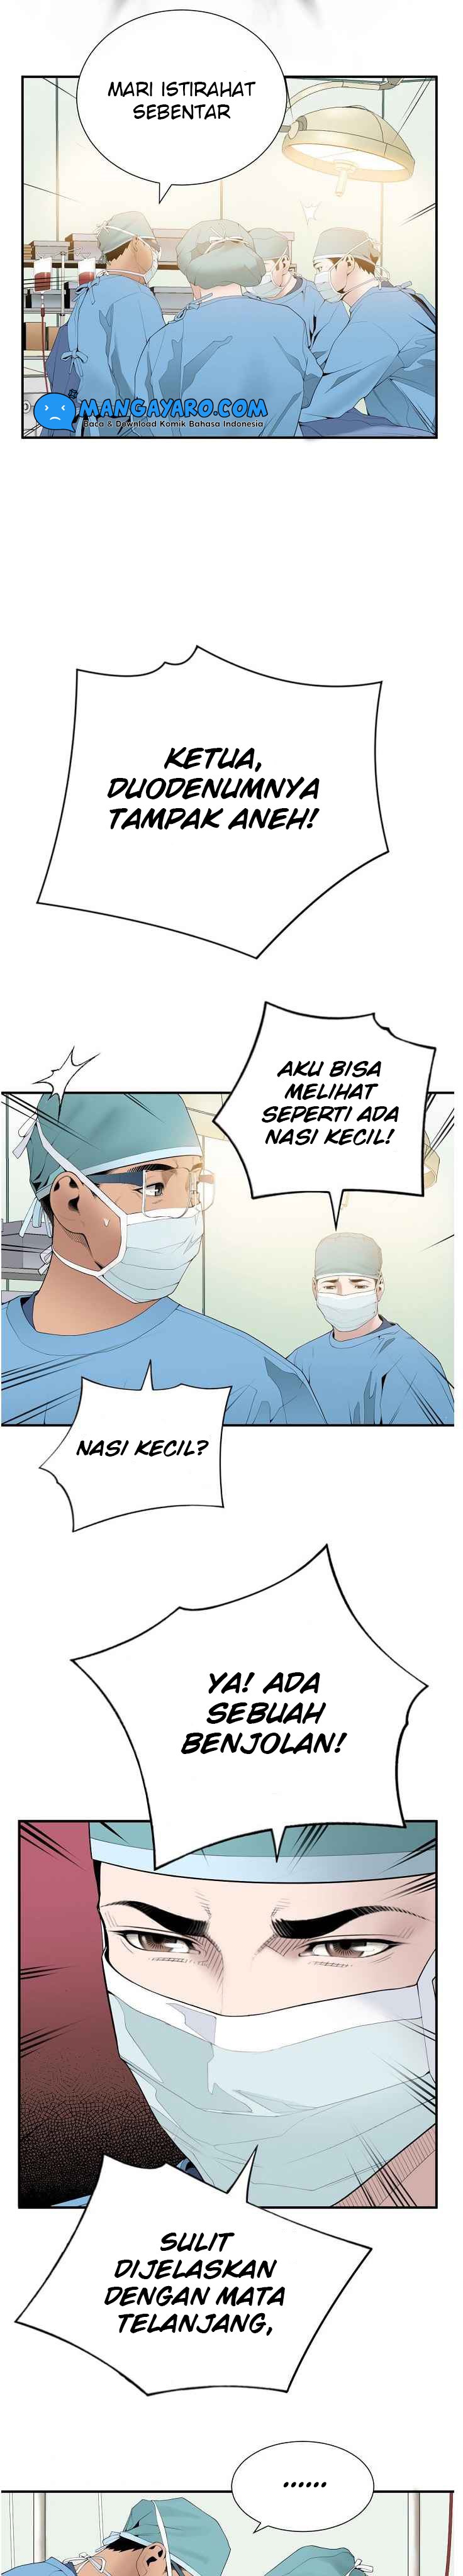 Dr. Choi Tae-Soo Chapter 20